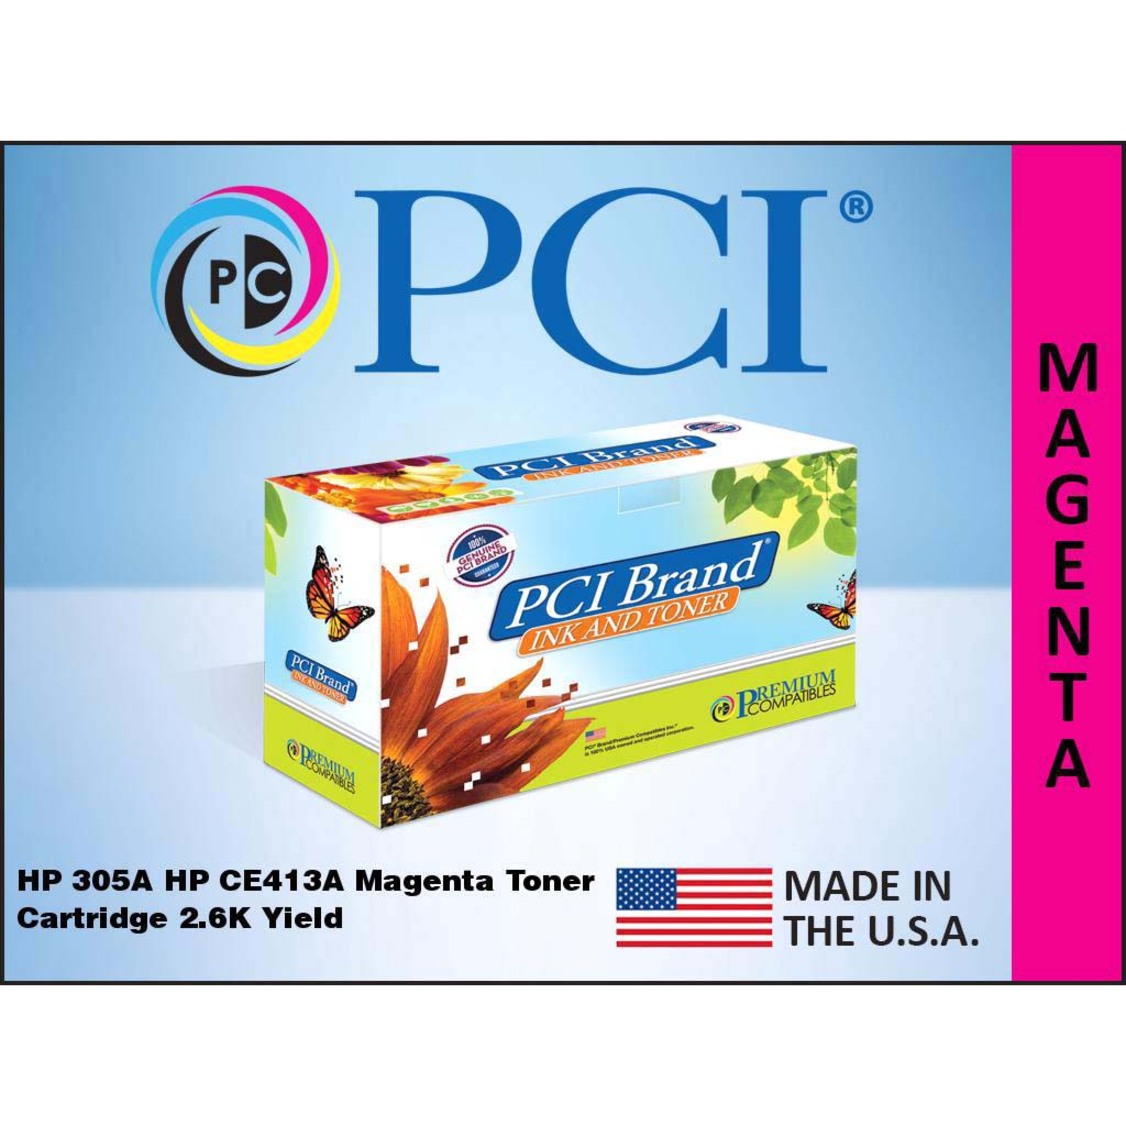 Premium Compatibles CE413A-RPC HP 305A Magenta Toner Cartridge 2.6K Yield Made in the USA, High-Quality Printing Solution